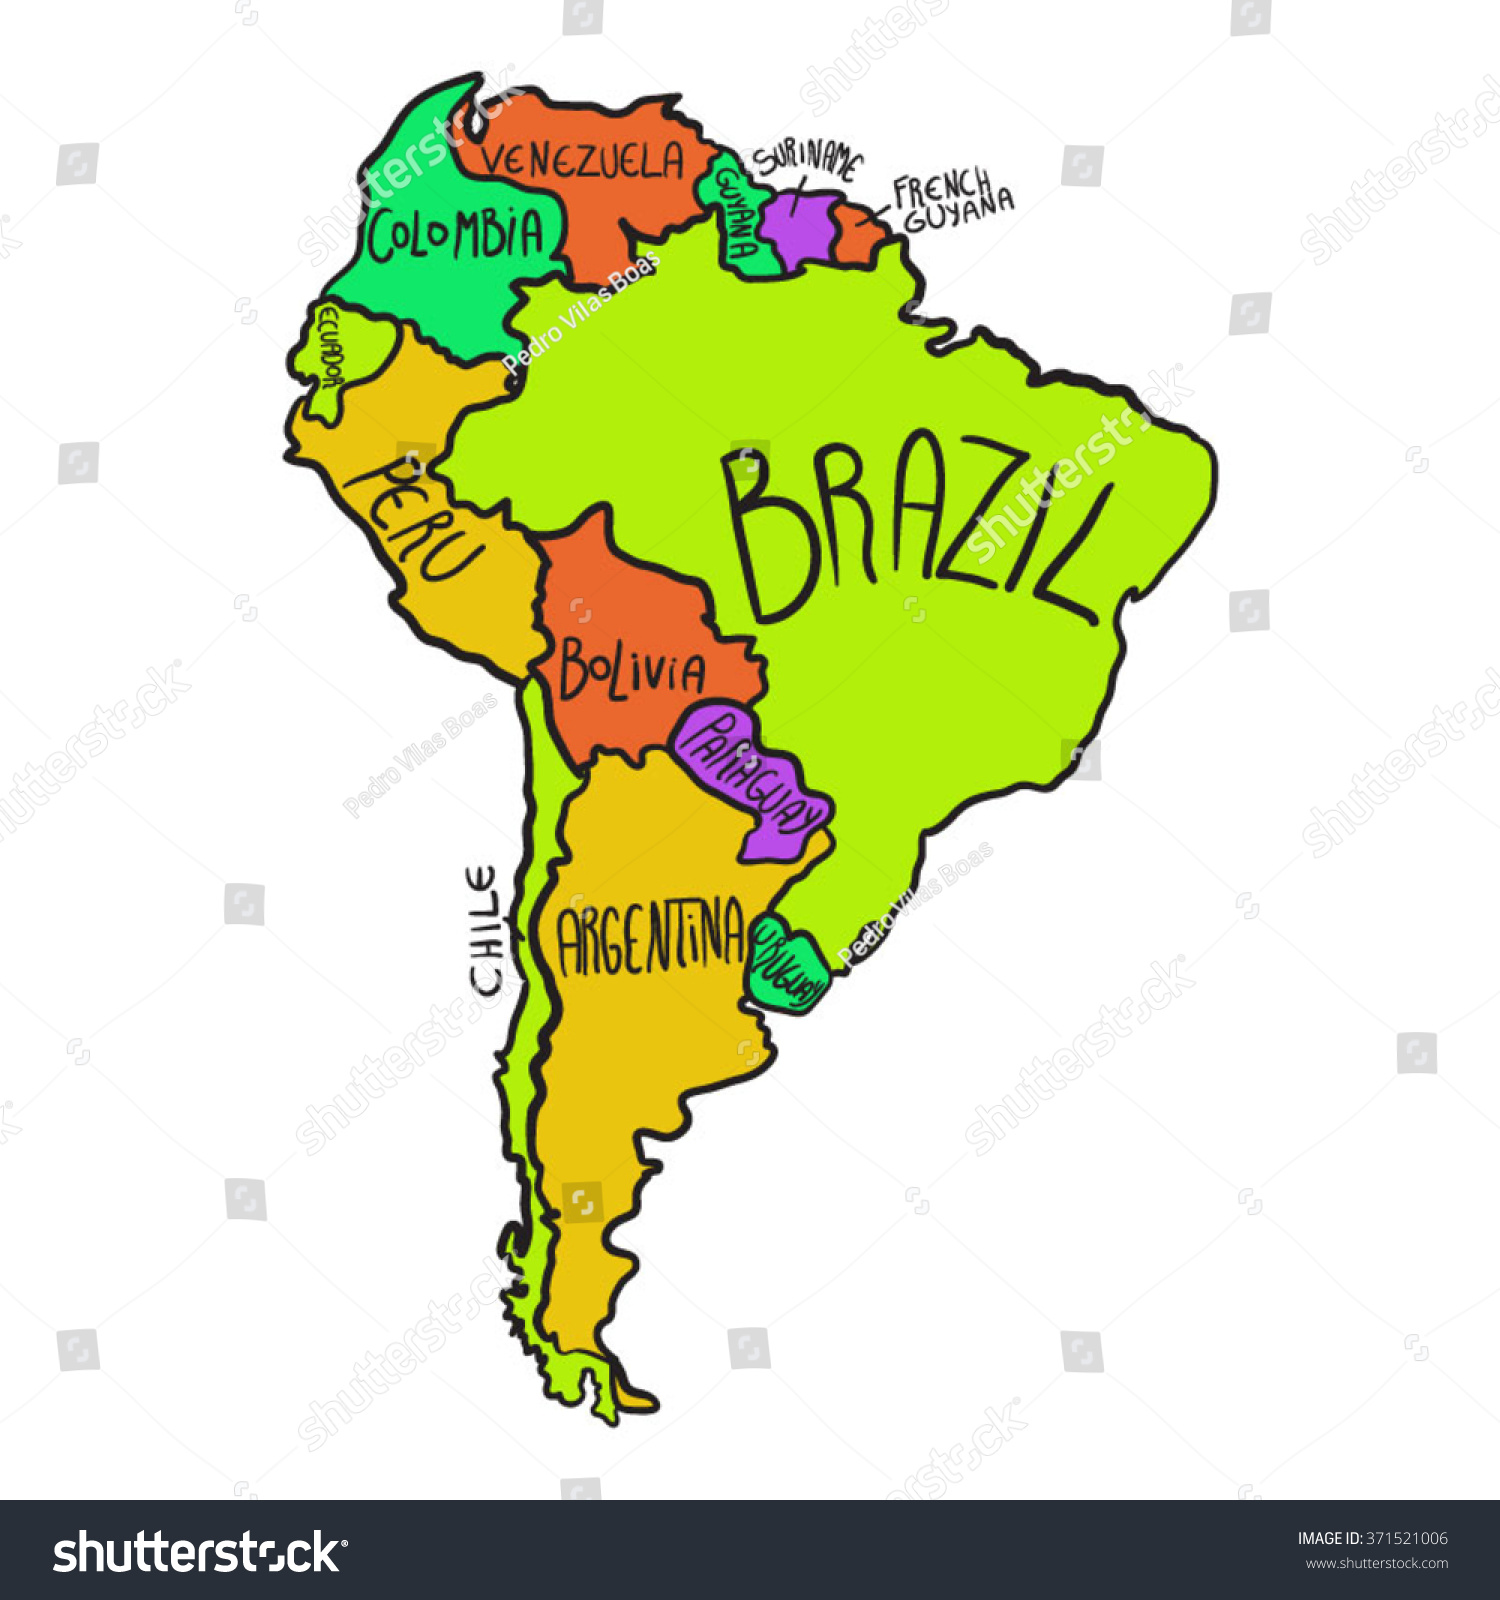 clipart map south america - photo #13